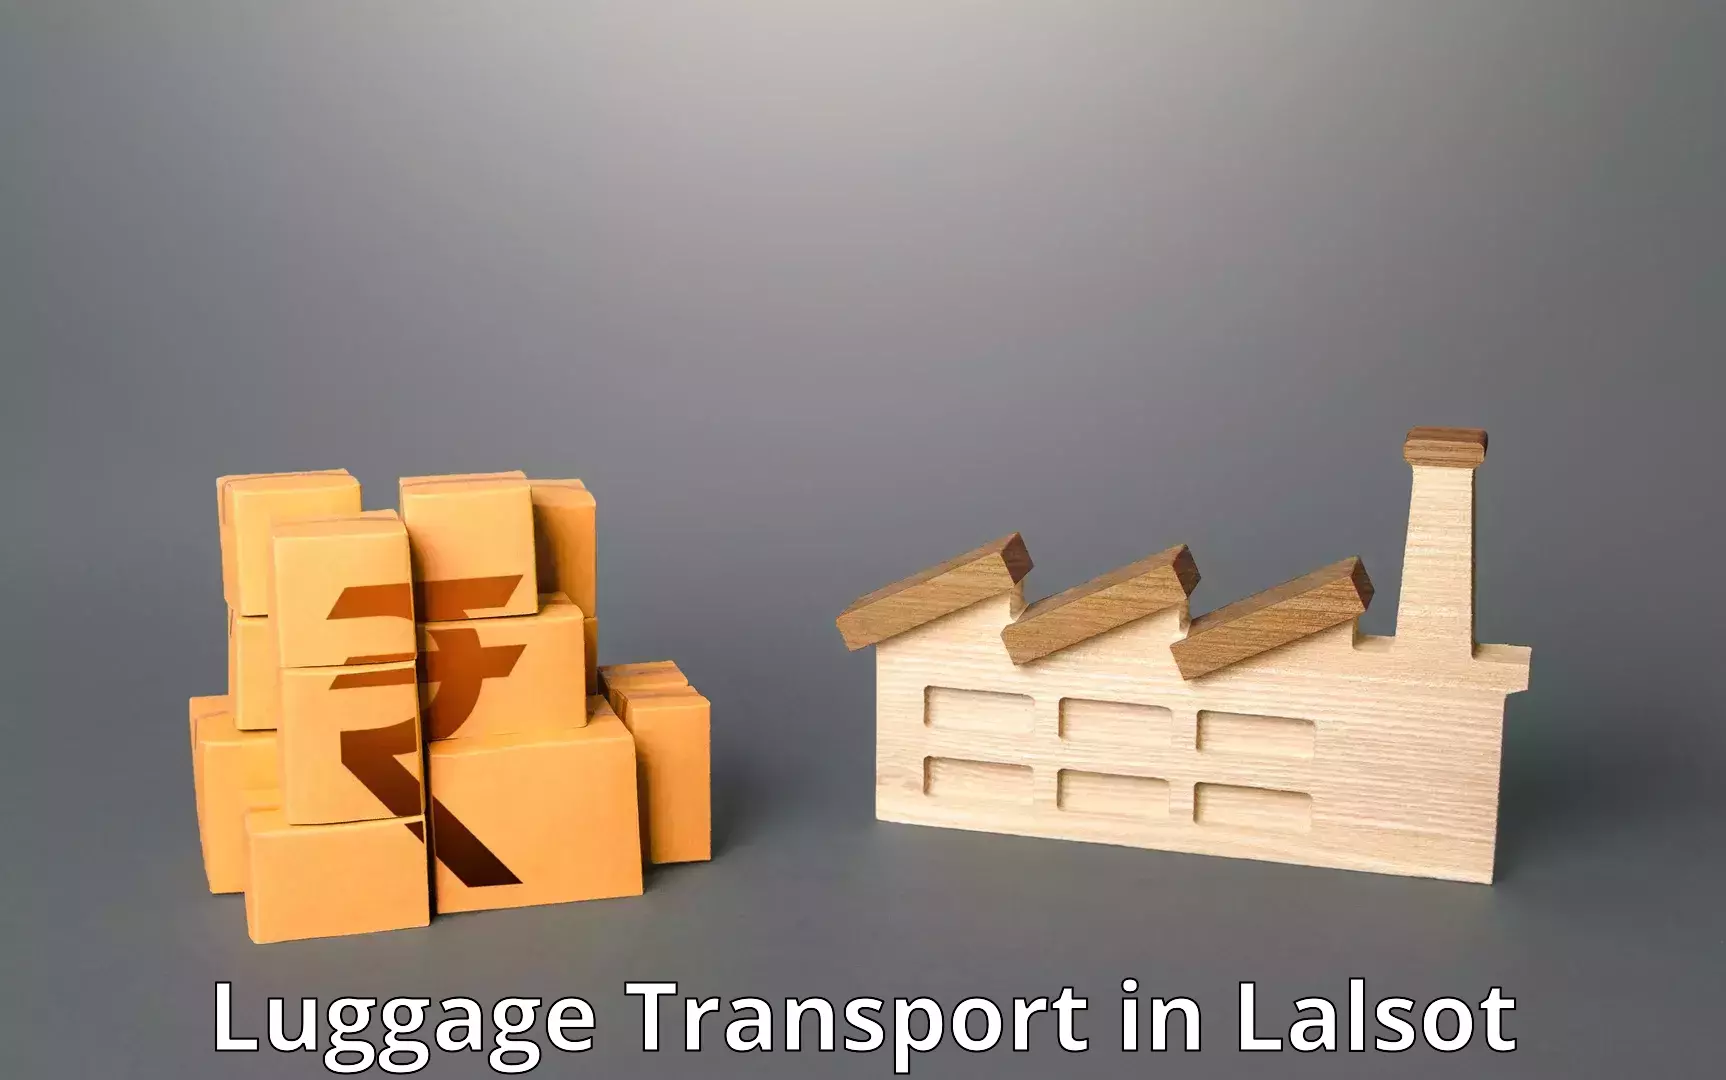 Luggage transport guidelines in Lalsot